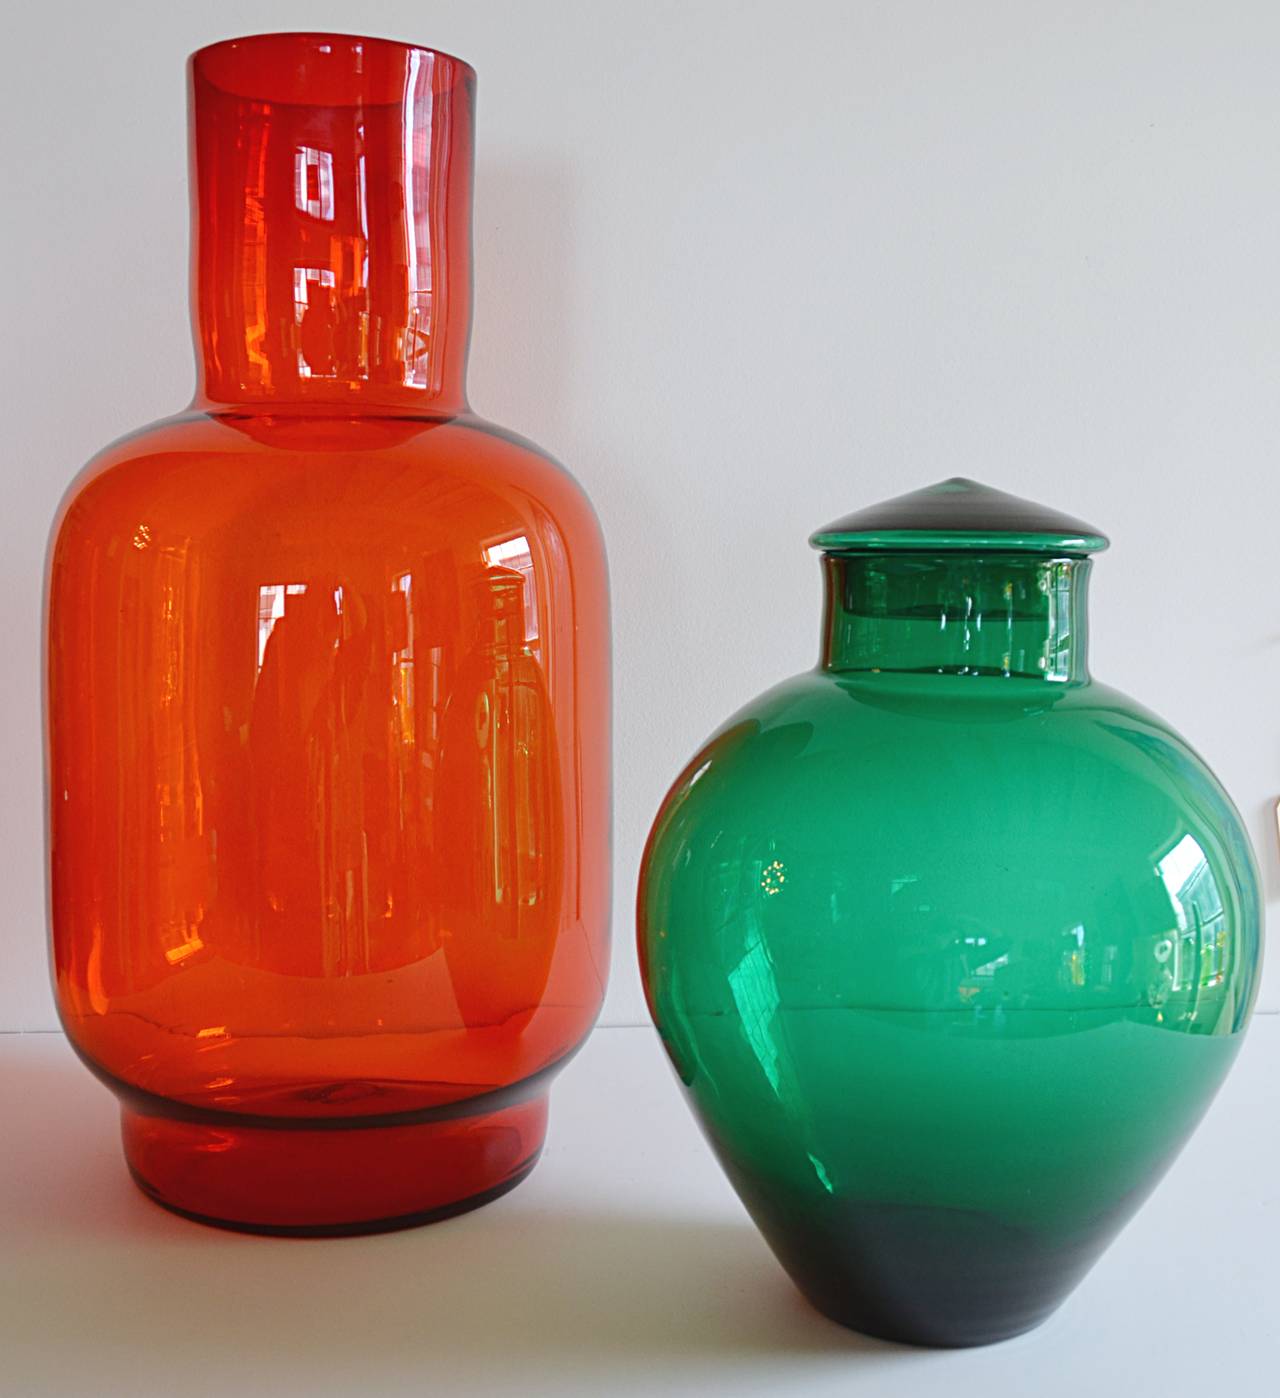 A two-piece Blenko blown glass collection consisting of tall tangerine vase and green covered jar. Jar measures 10.25